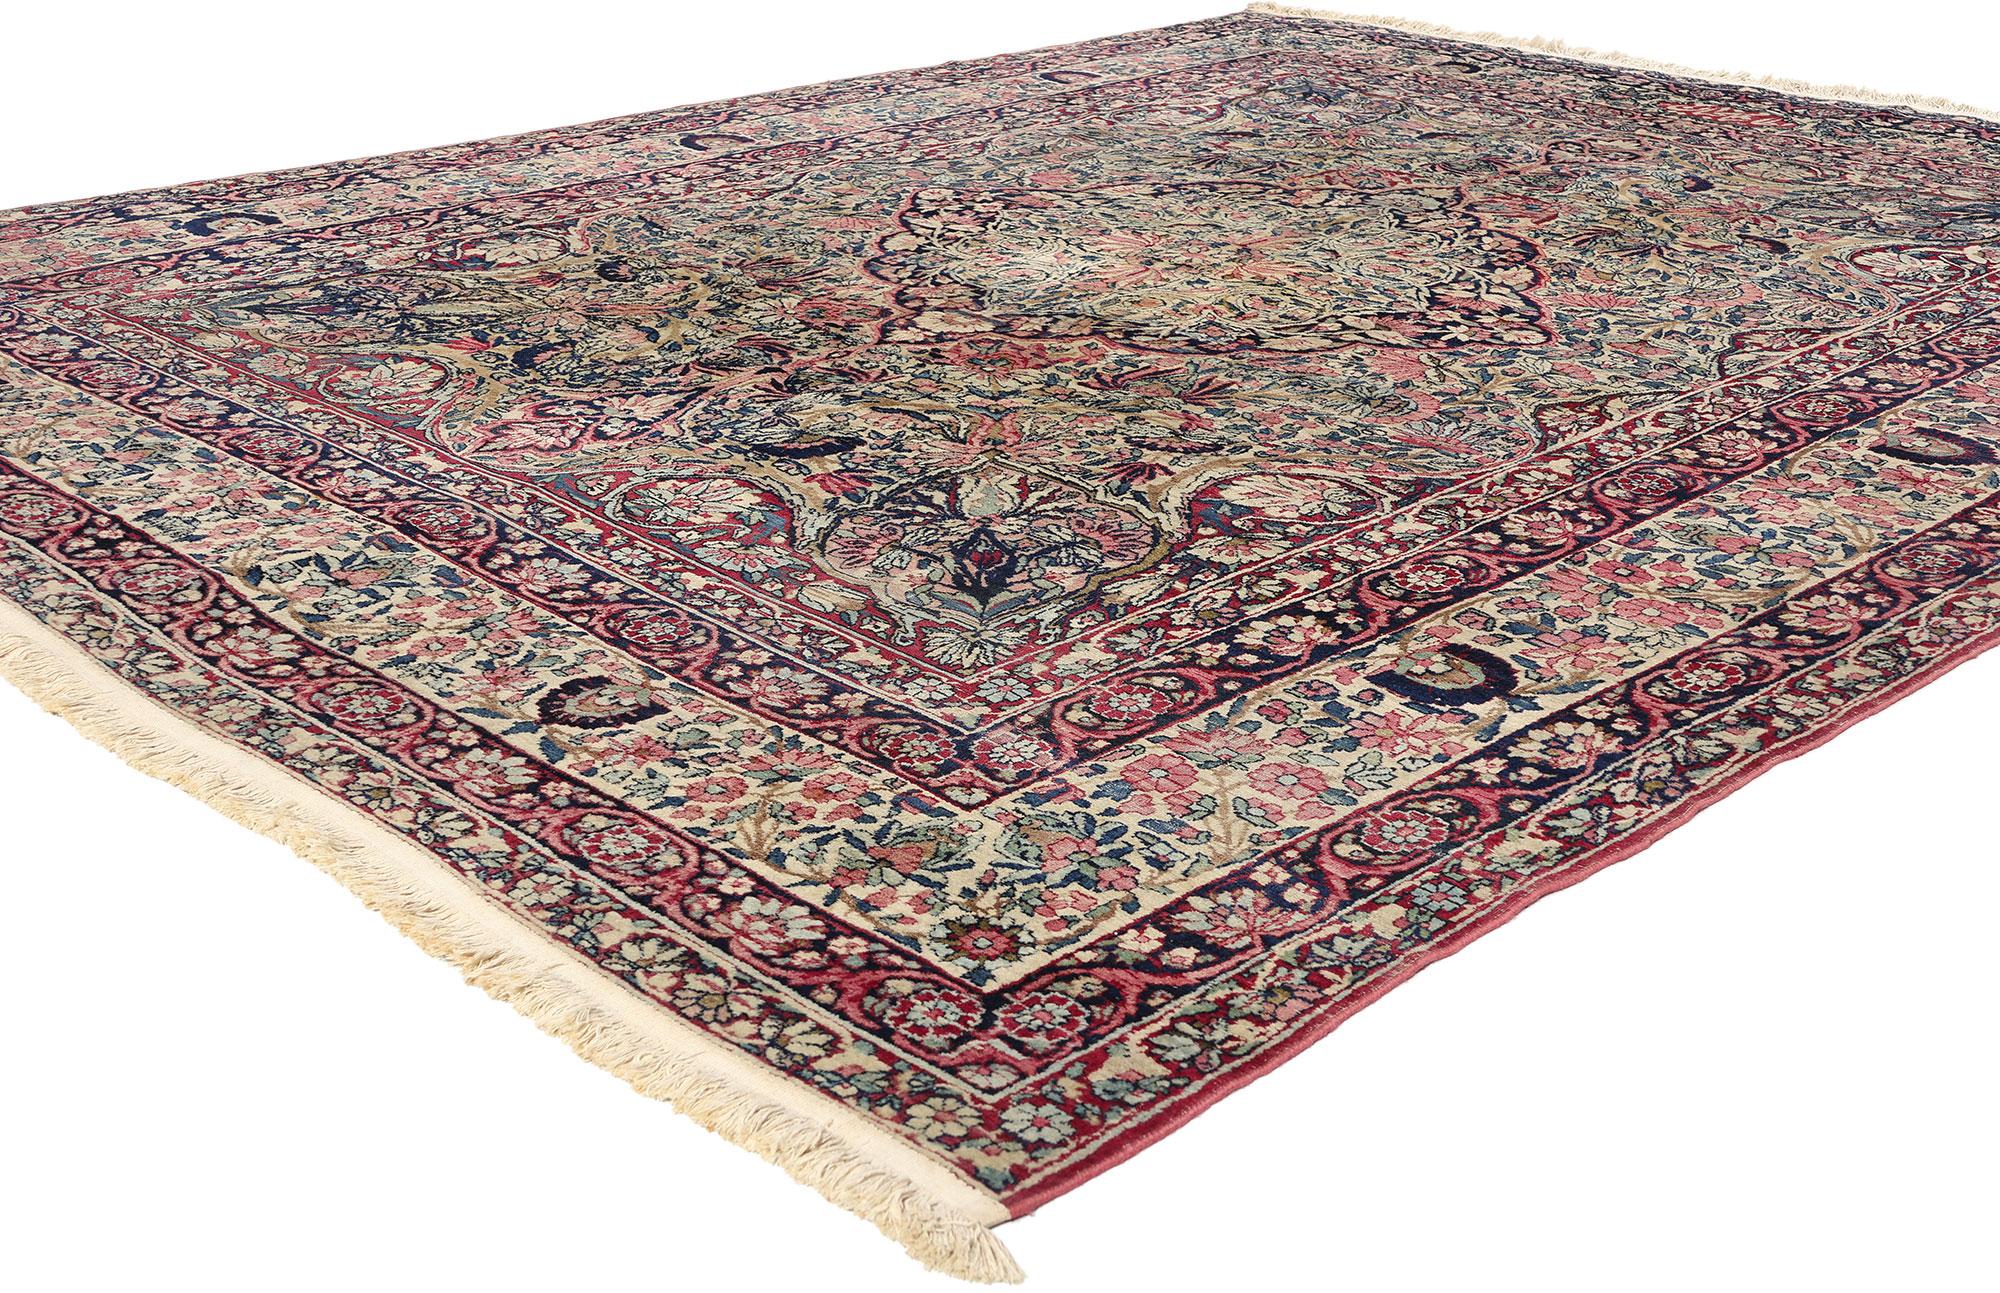 78759 Signed Antique Persian Kermanshah Rug, 09'08 x 11'02. Signed Persian Kermanshah rugs are Persian carpets bearing the signature or mark of the weaver, serving as an authentication of craftsmanship and providing insight into the rug's origins.